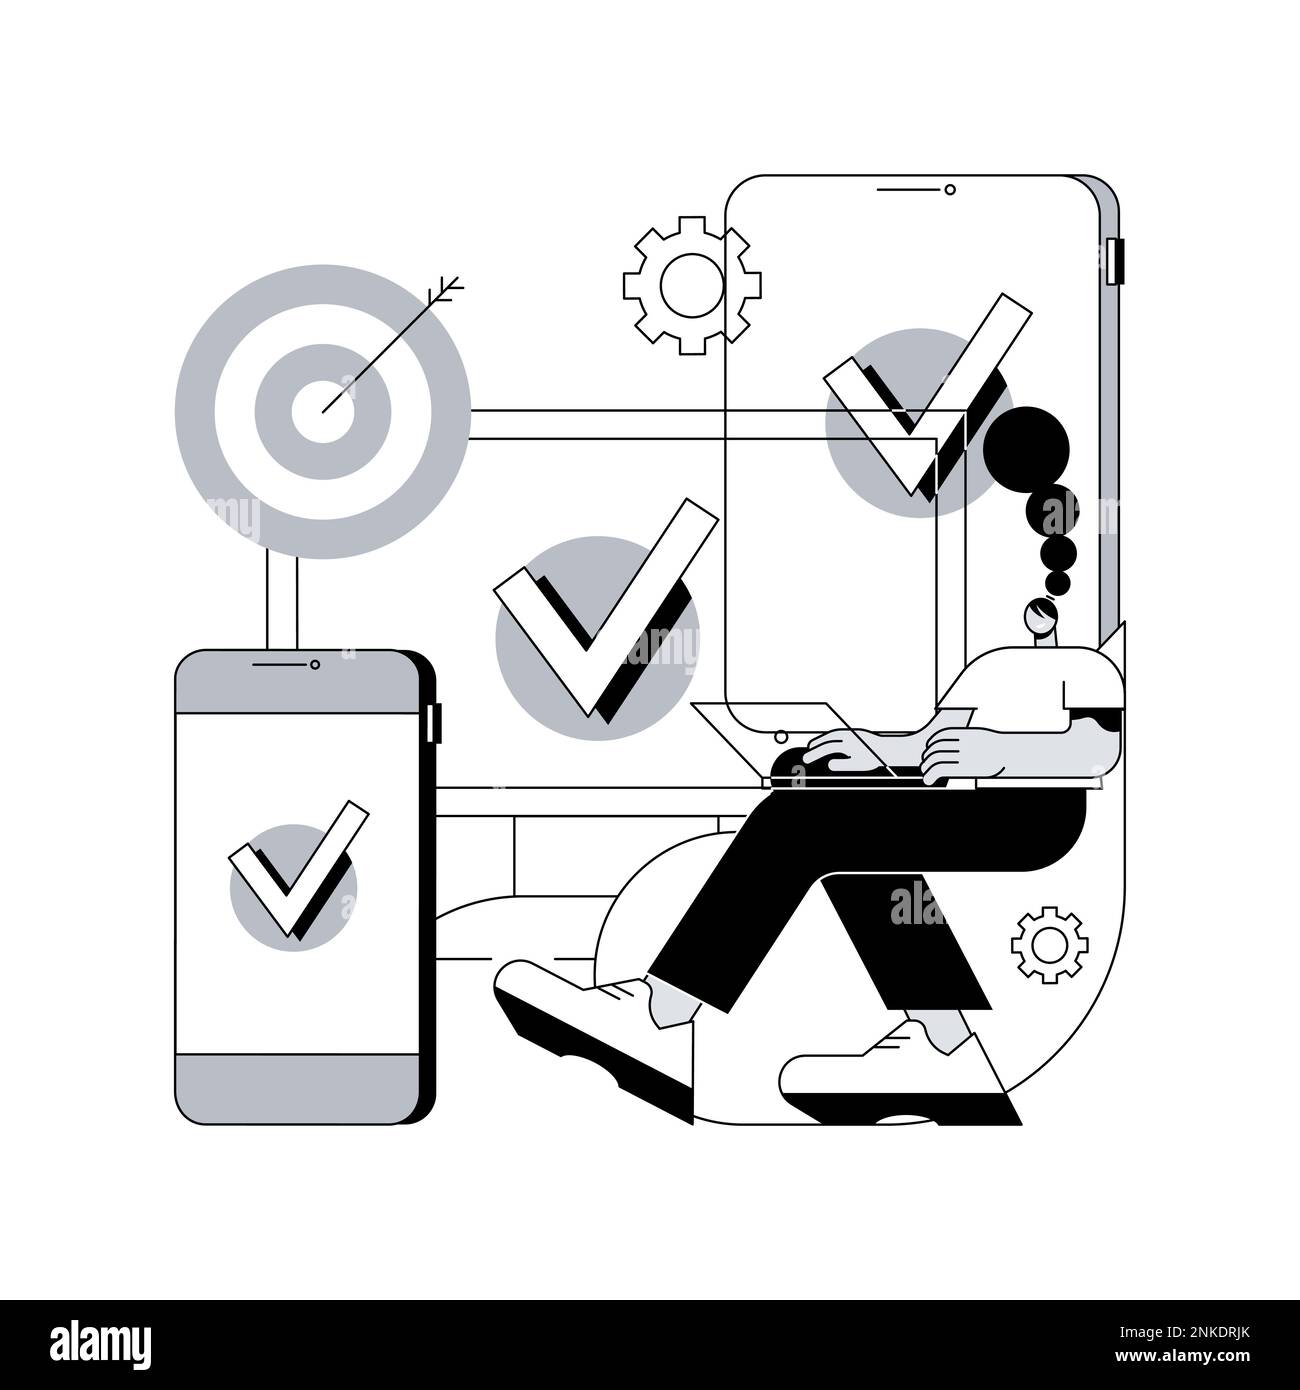 Cross-device tracking abstract concept vector illustration. Multi device use and reports, one user profile, cross-device tracking capability, analytics, device identification abstract metaphor. Stock Vector